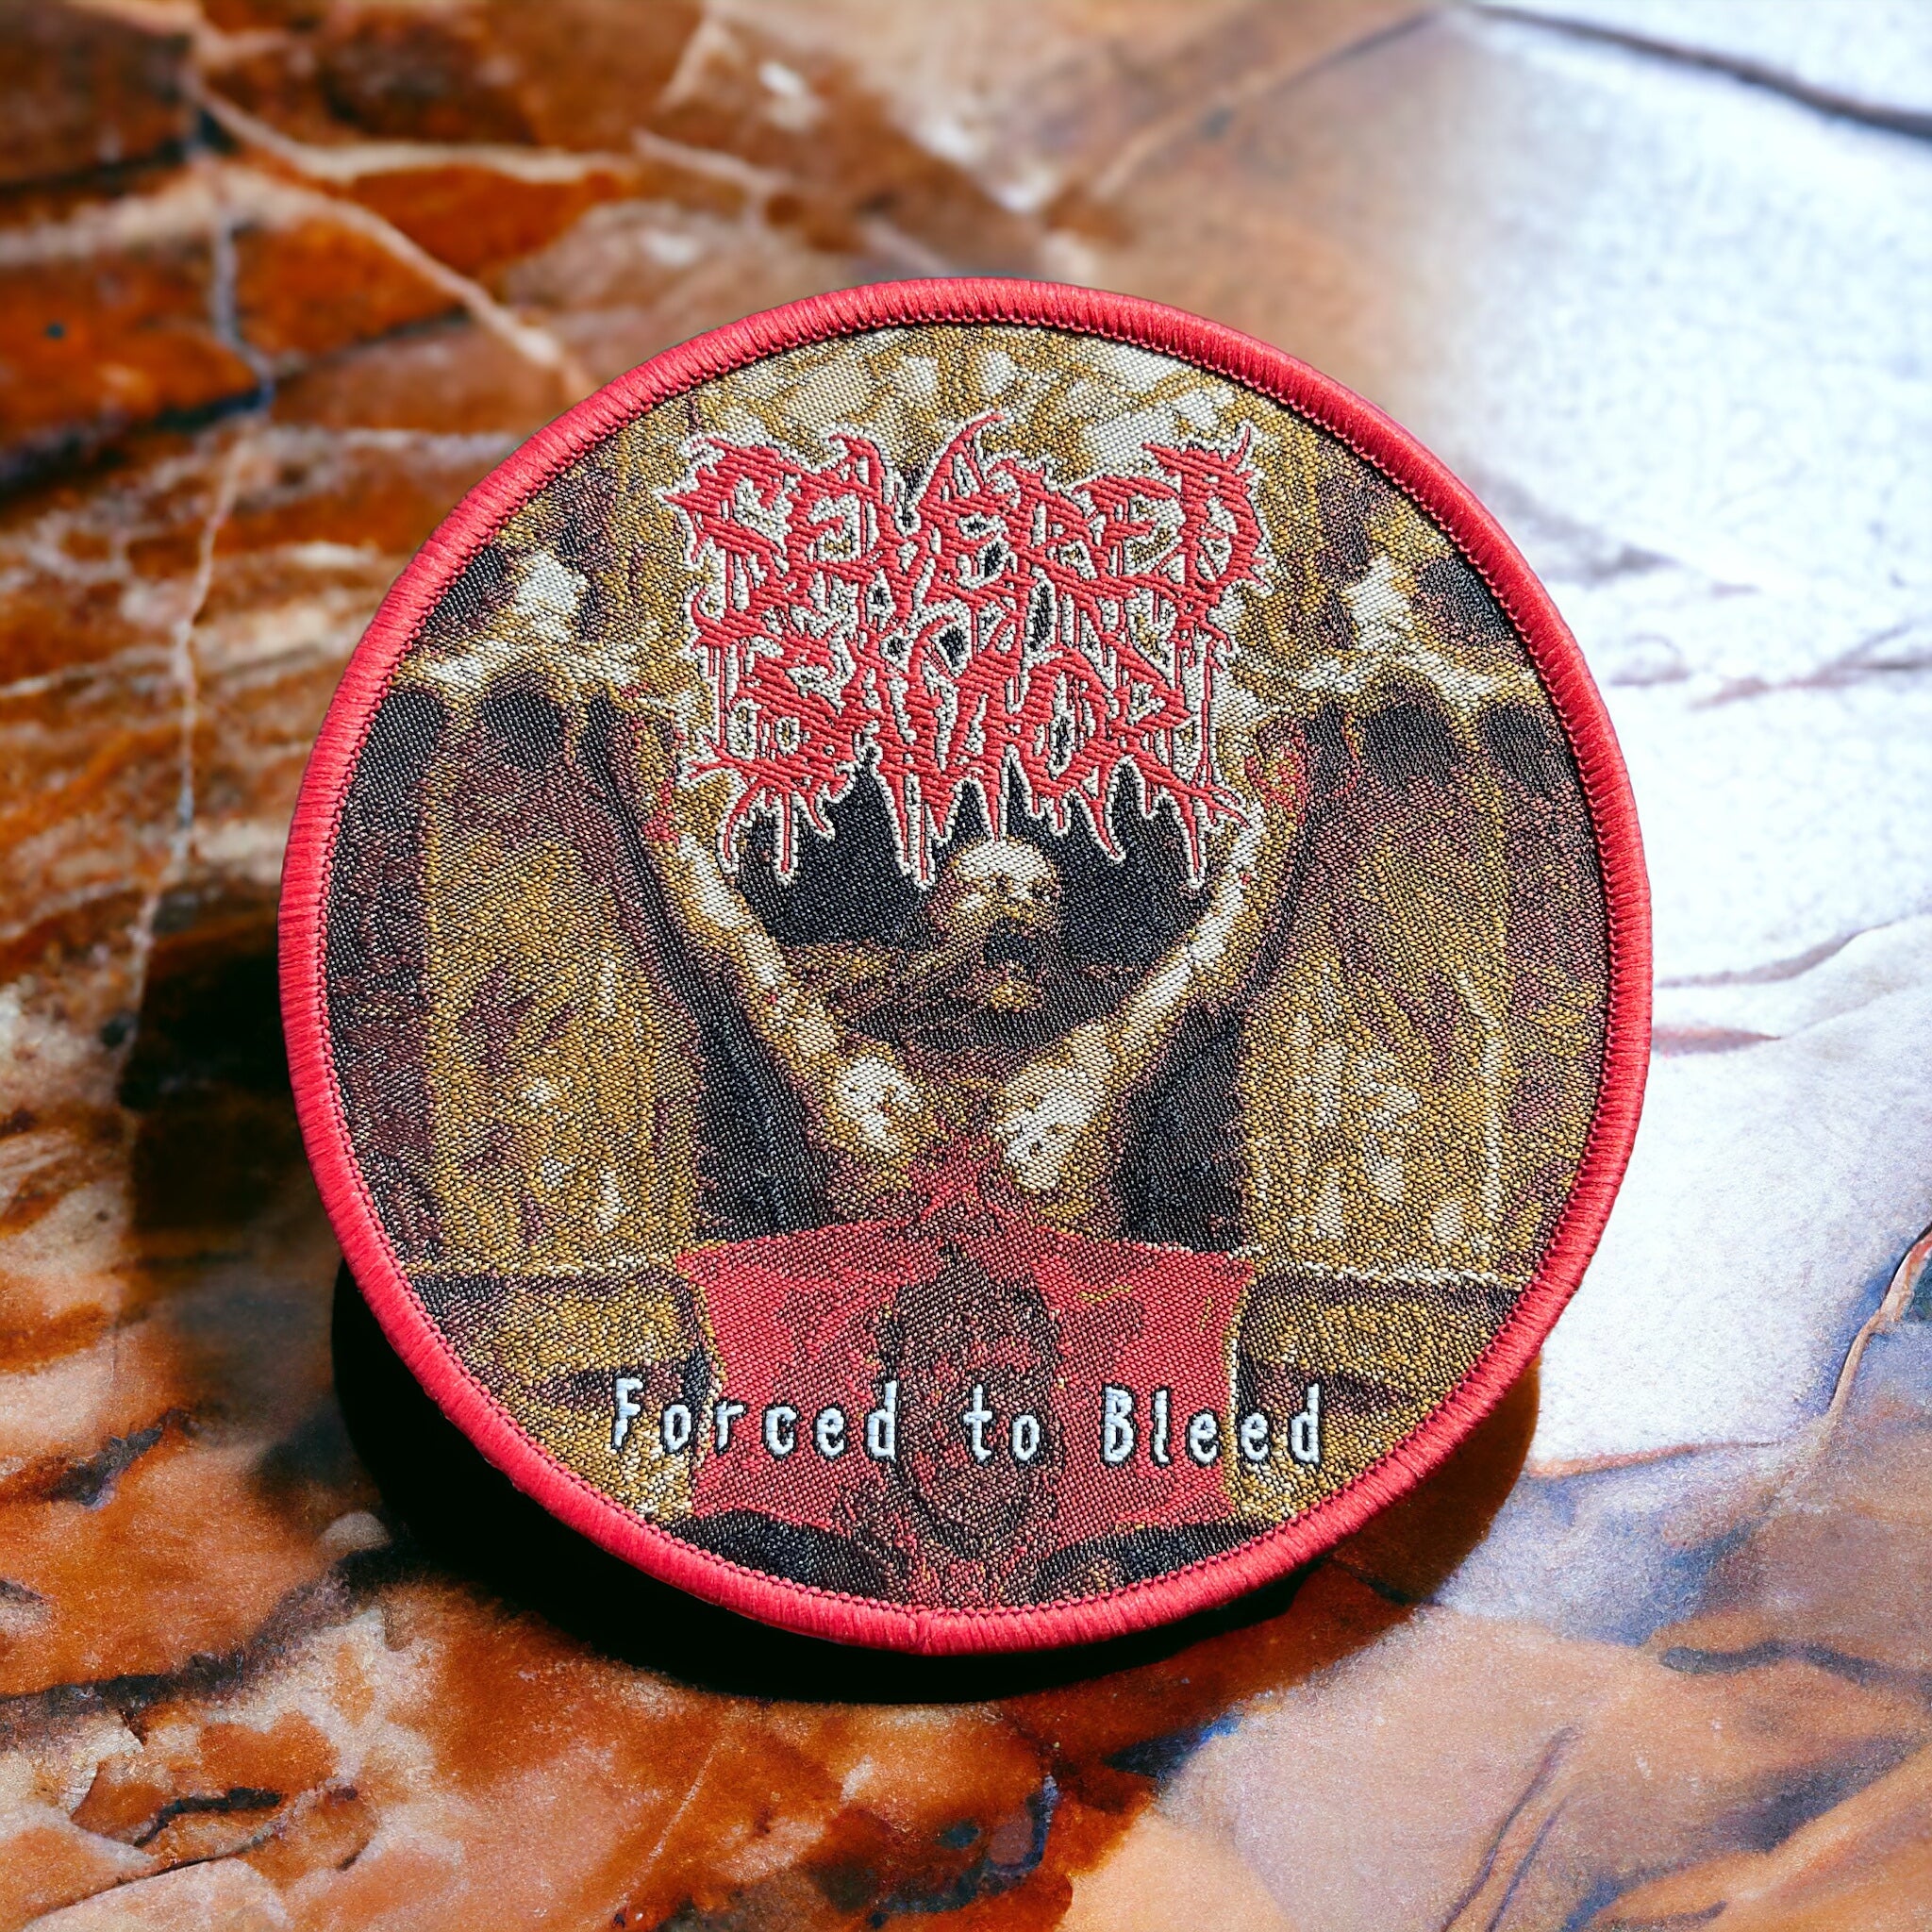 Severed Savior - Round Forced to Bleed Patch - Red Border